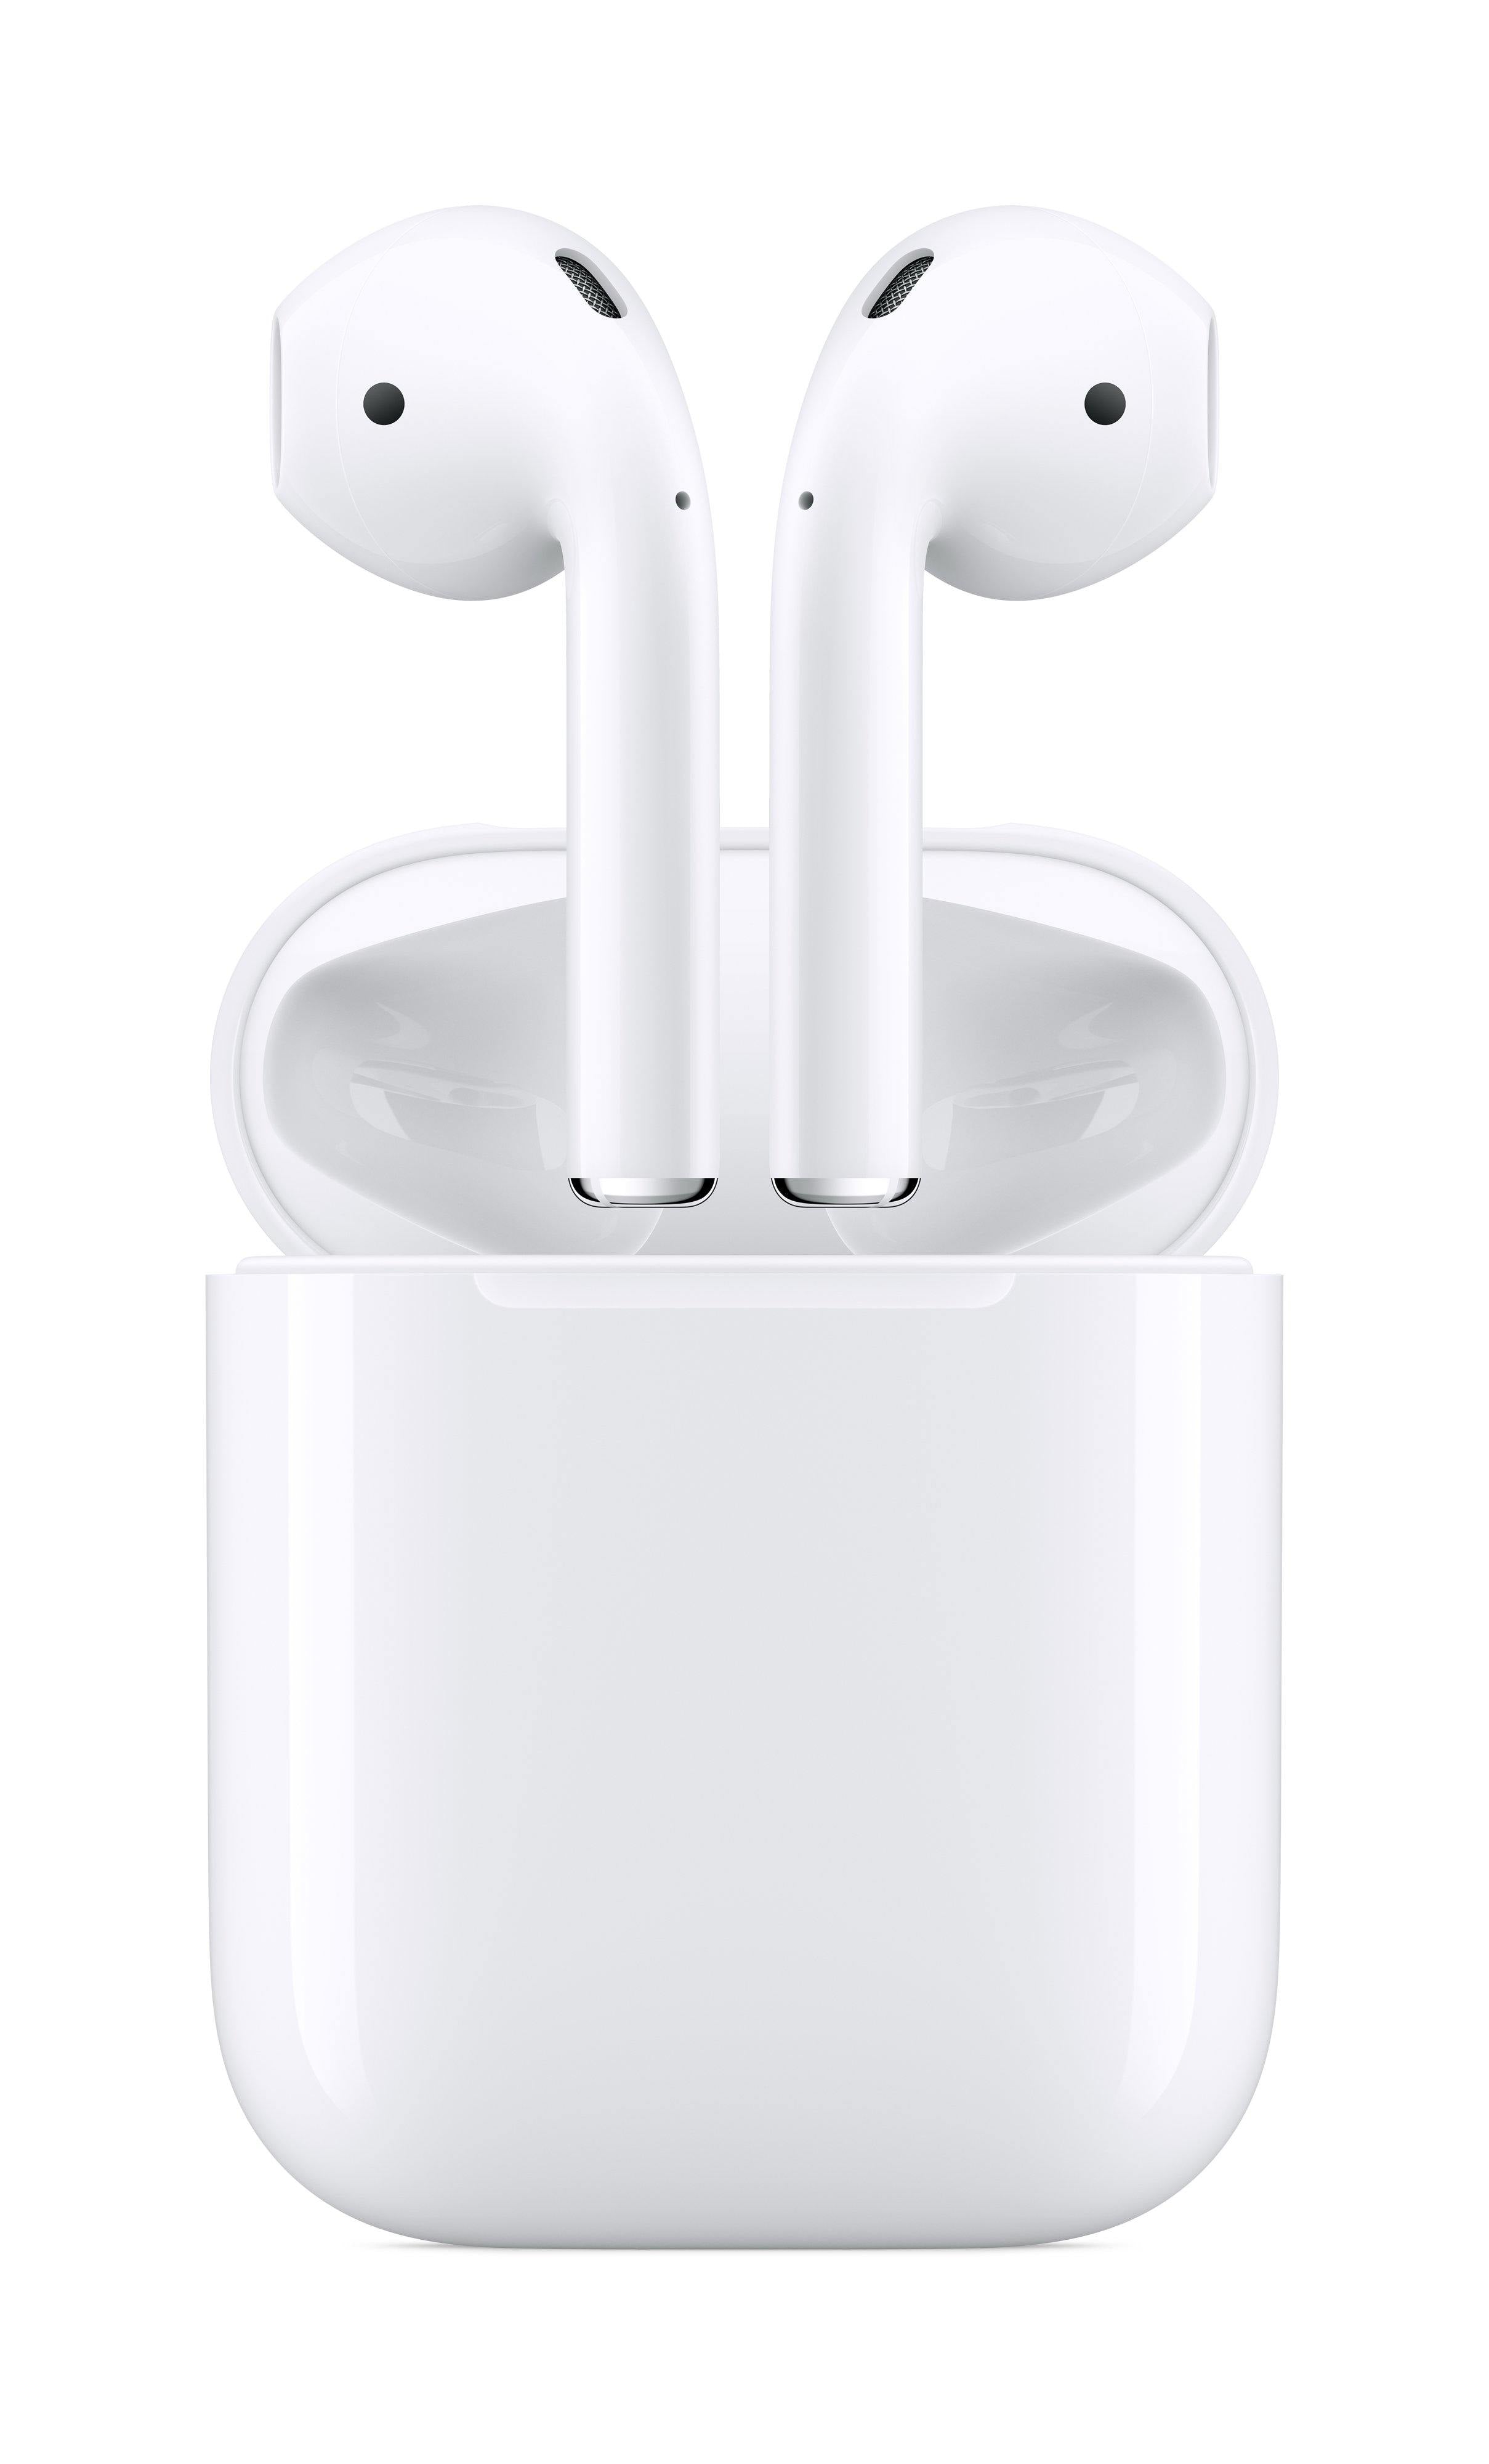 AirPods with Charging Case (2019) - DNA